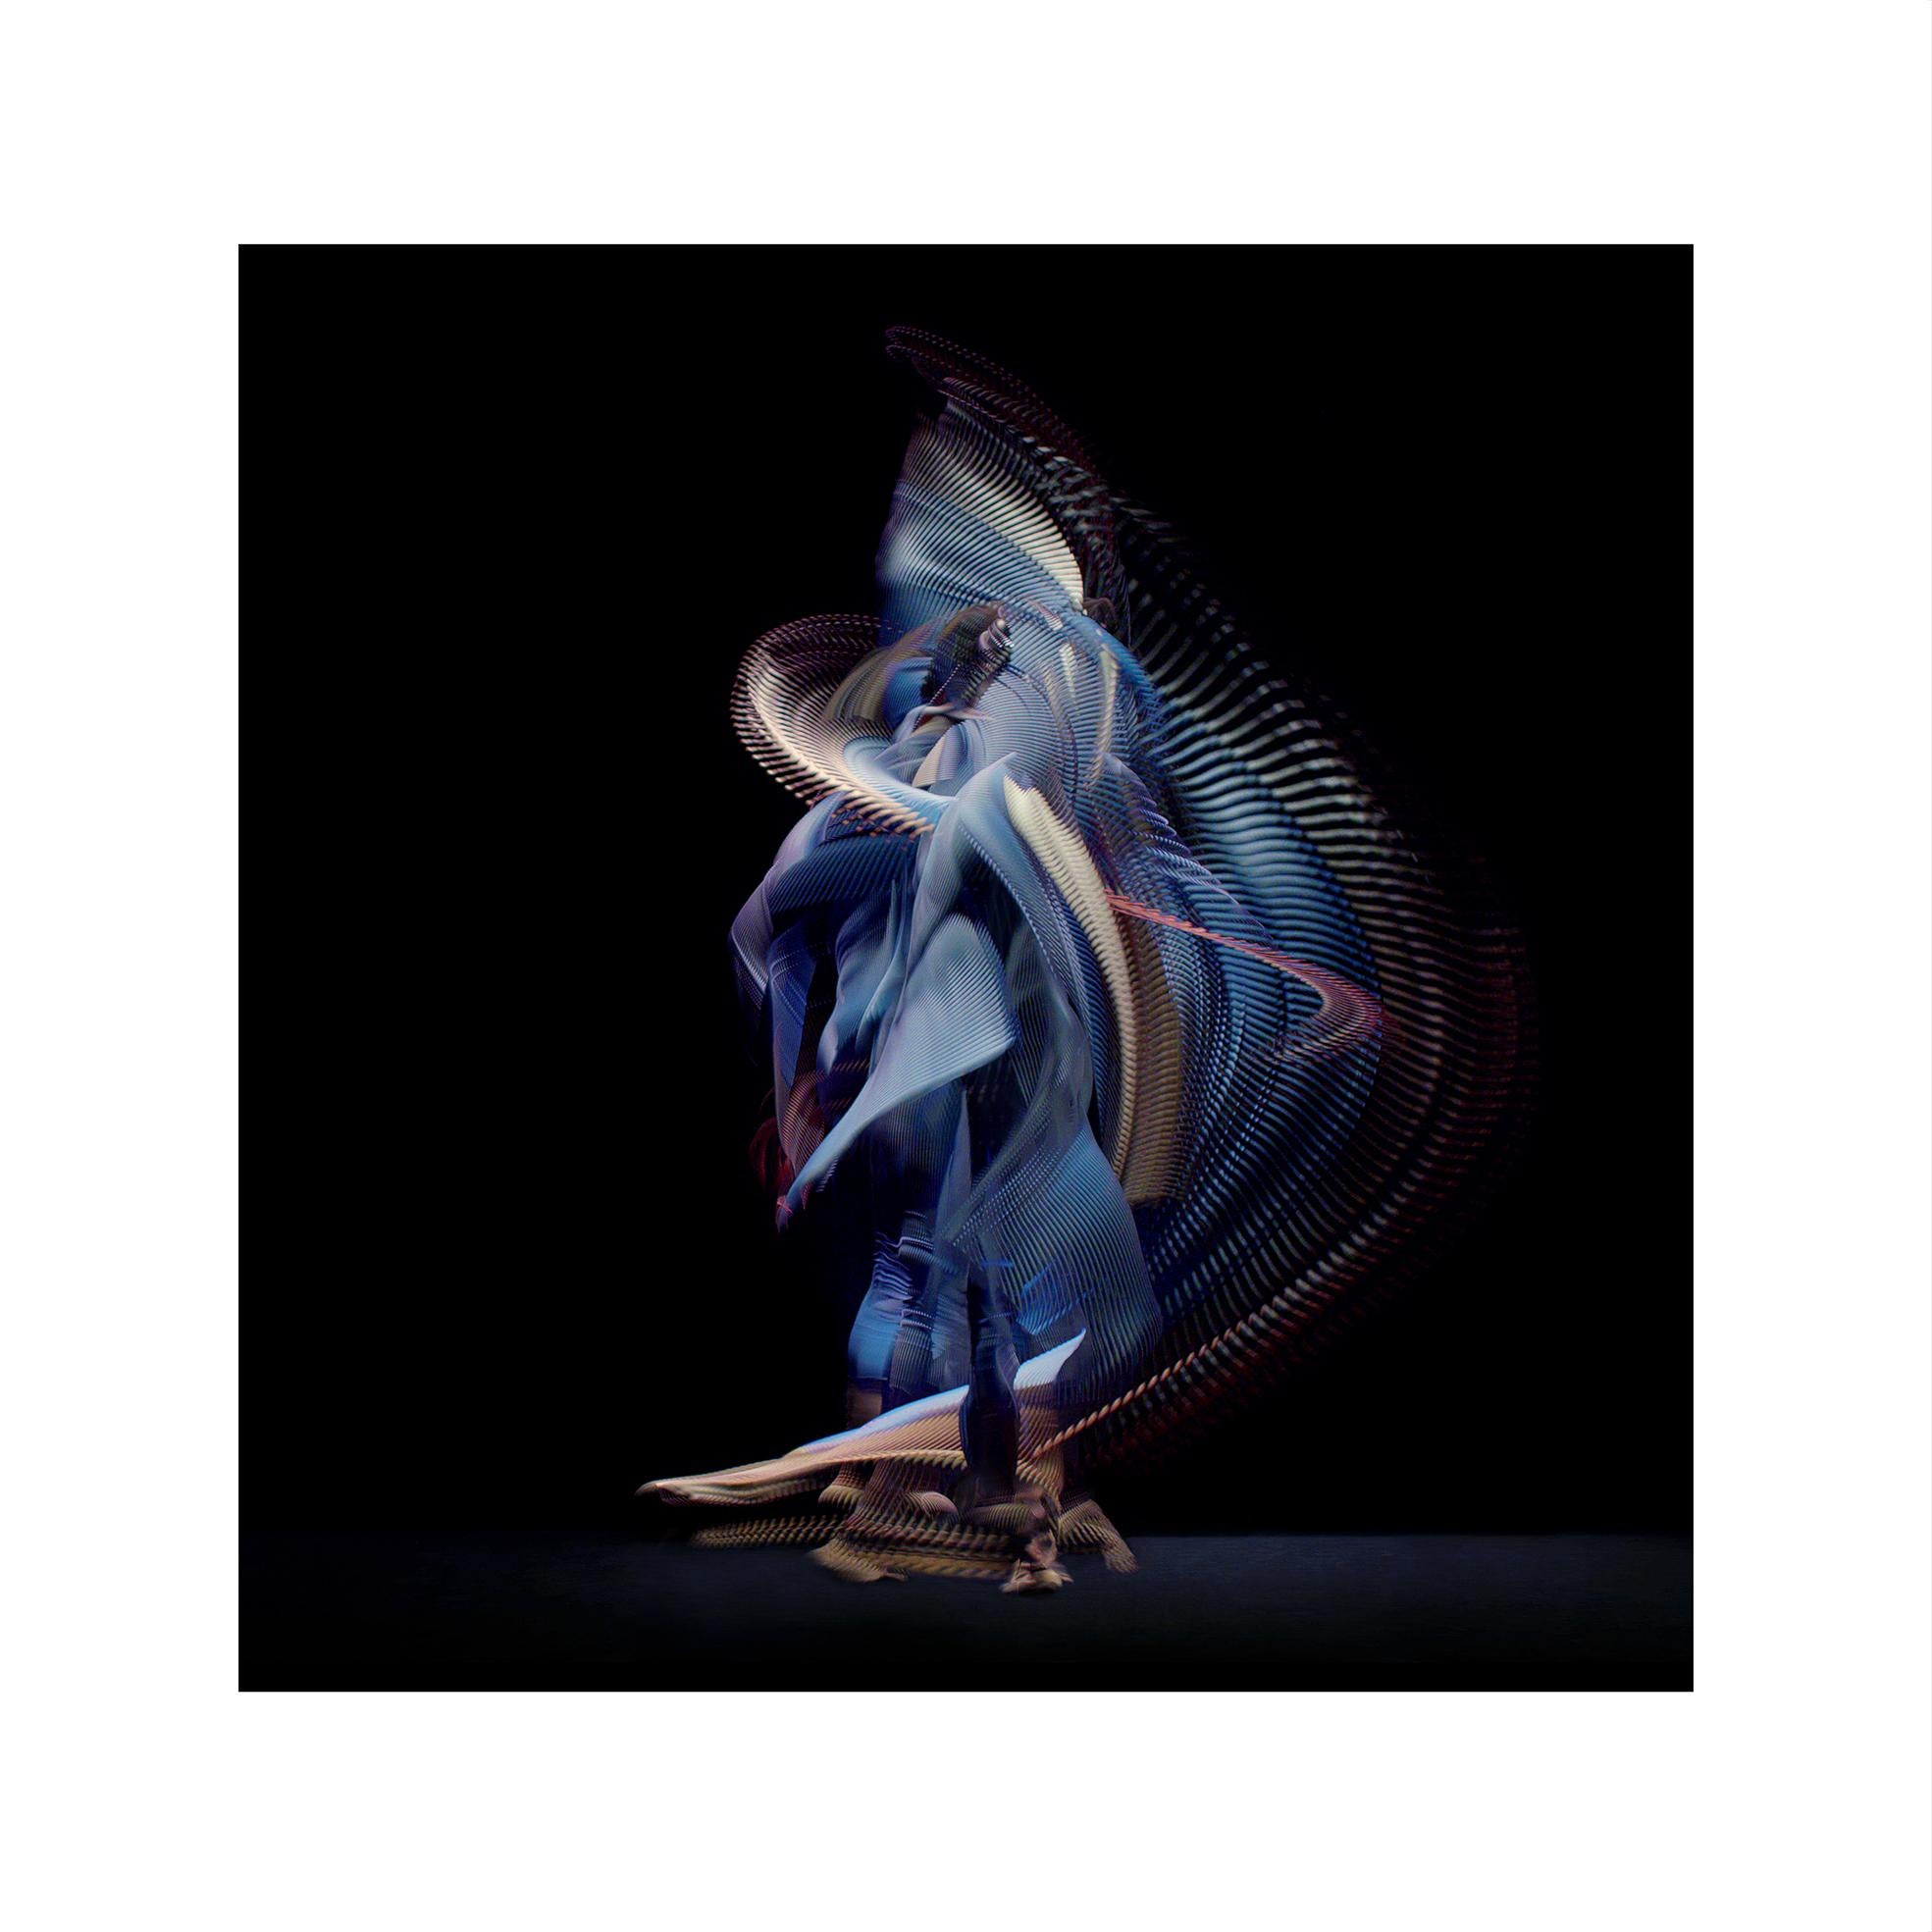 Giles Revell      Portrait Photograph - Abstract Dancers, Dark Blue 1, 2019 by Giles Revell - Photography, Black, Ballet